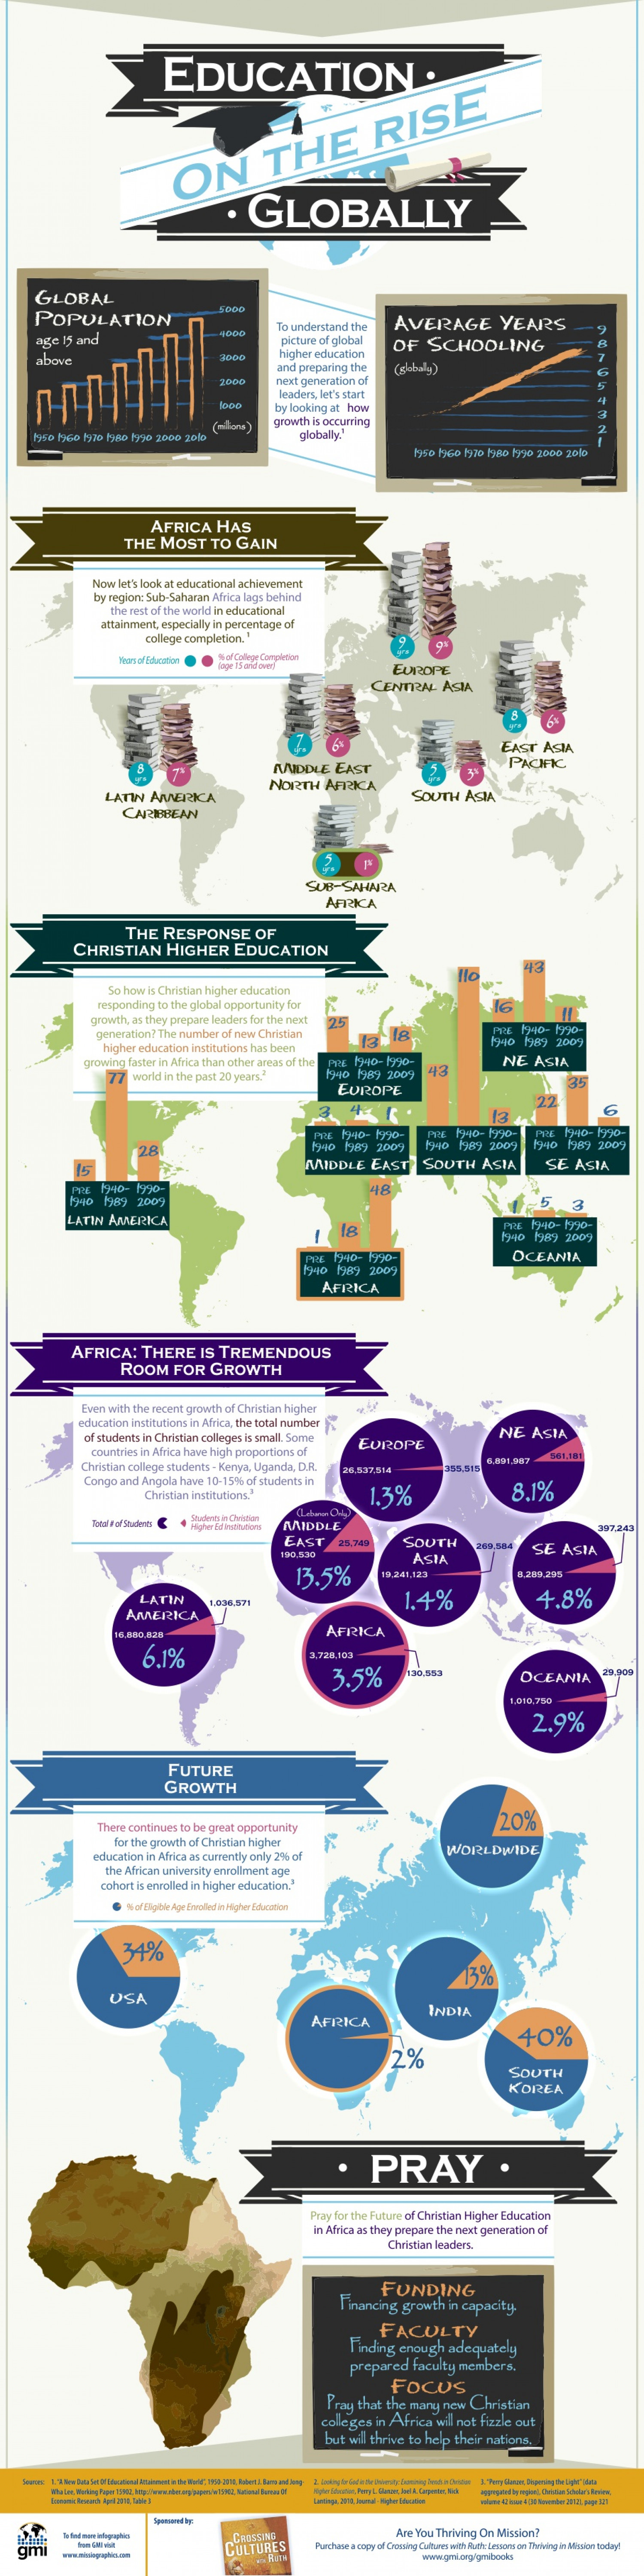 Education on the Rise Globally Infographic